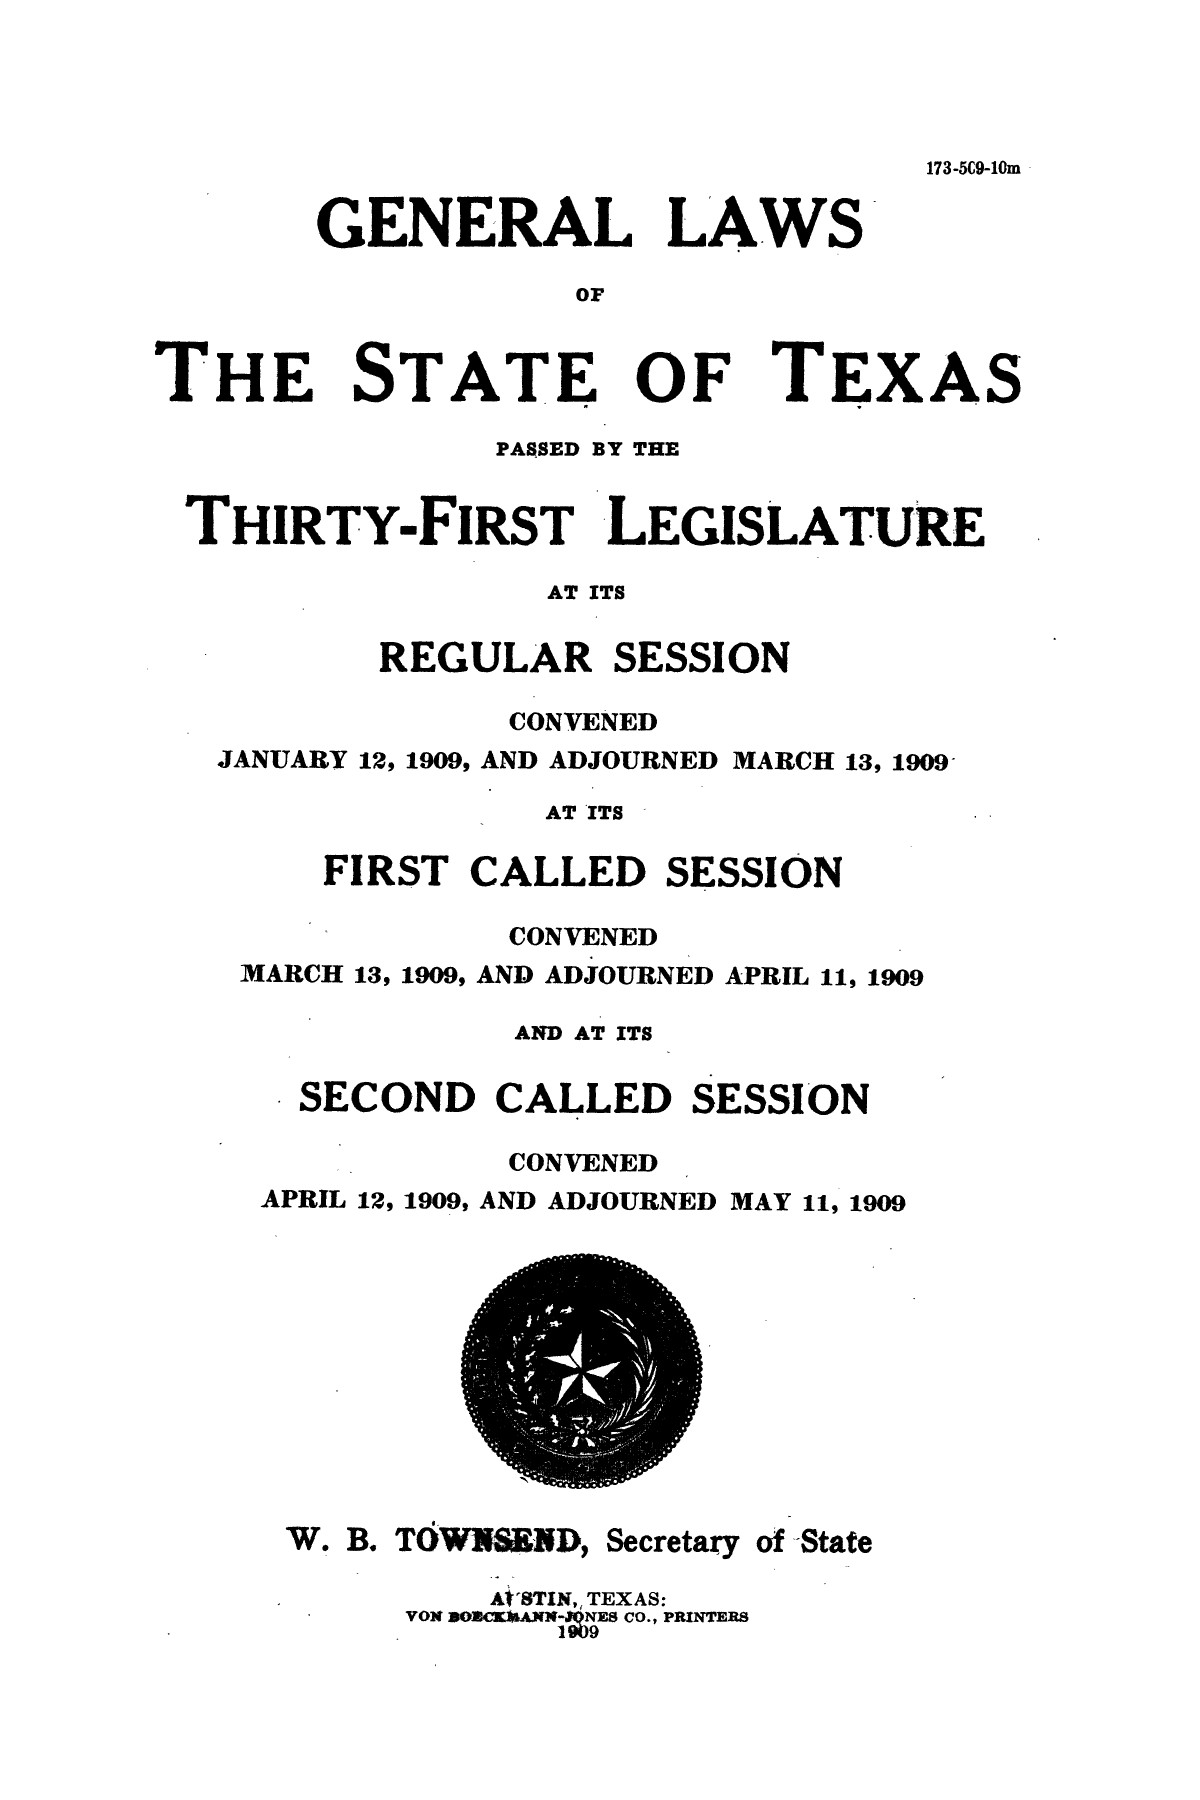 The Laws of Texas, 1909-1910 [Volume 14]
                                                
                                                    [Sequence #]: 1 of 1668
                                                